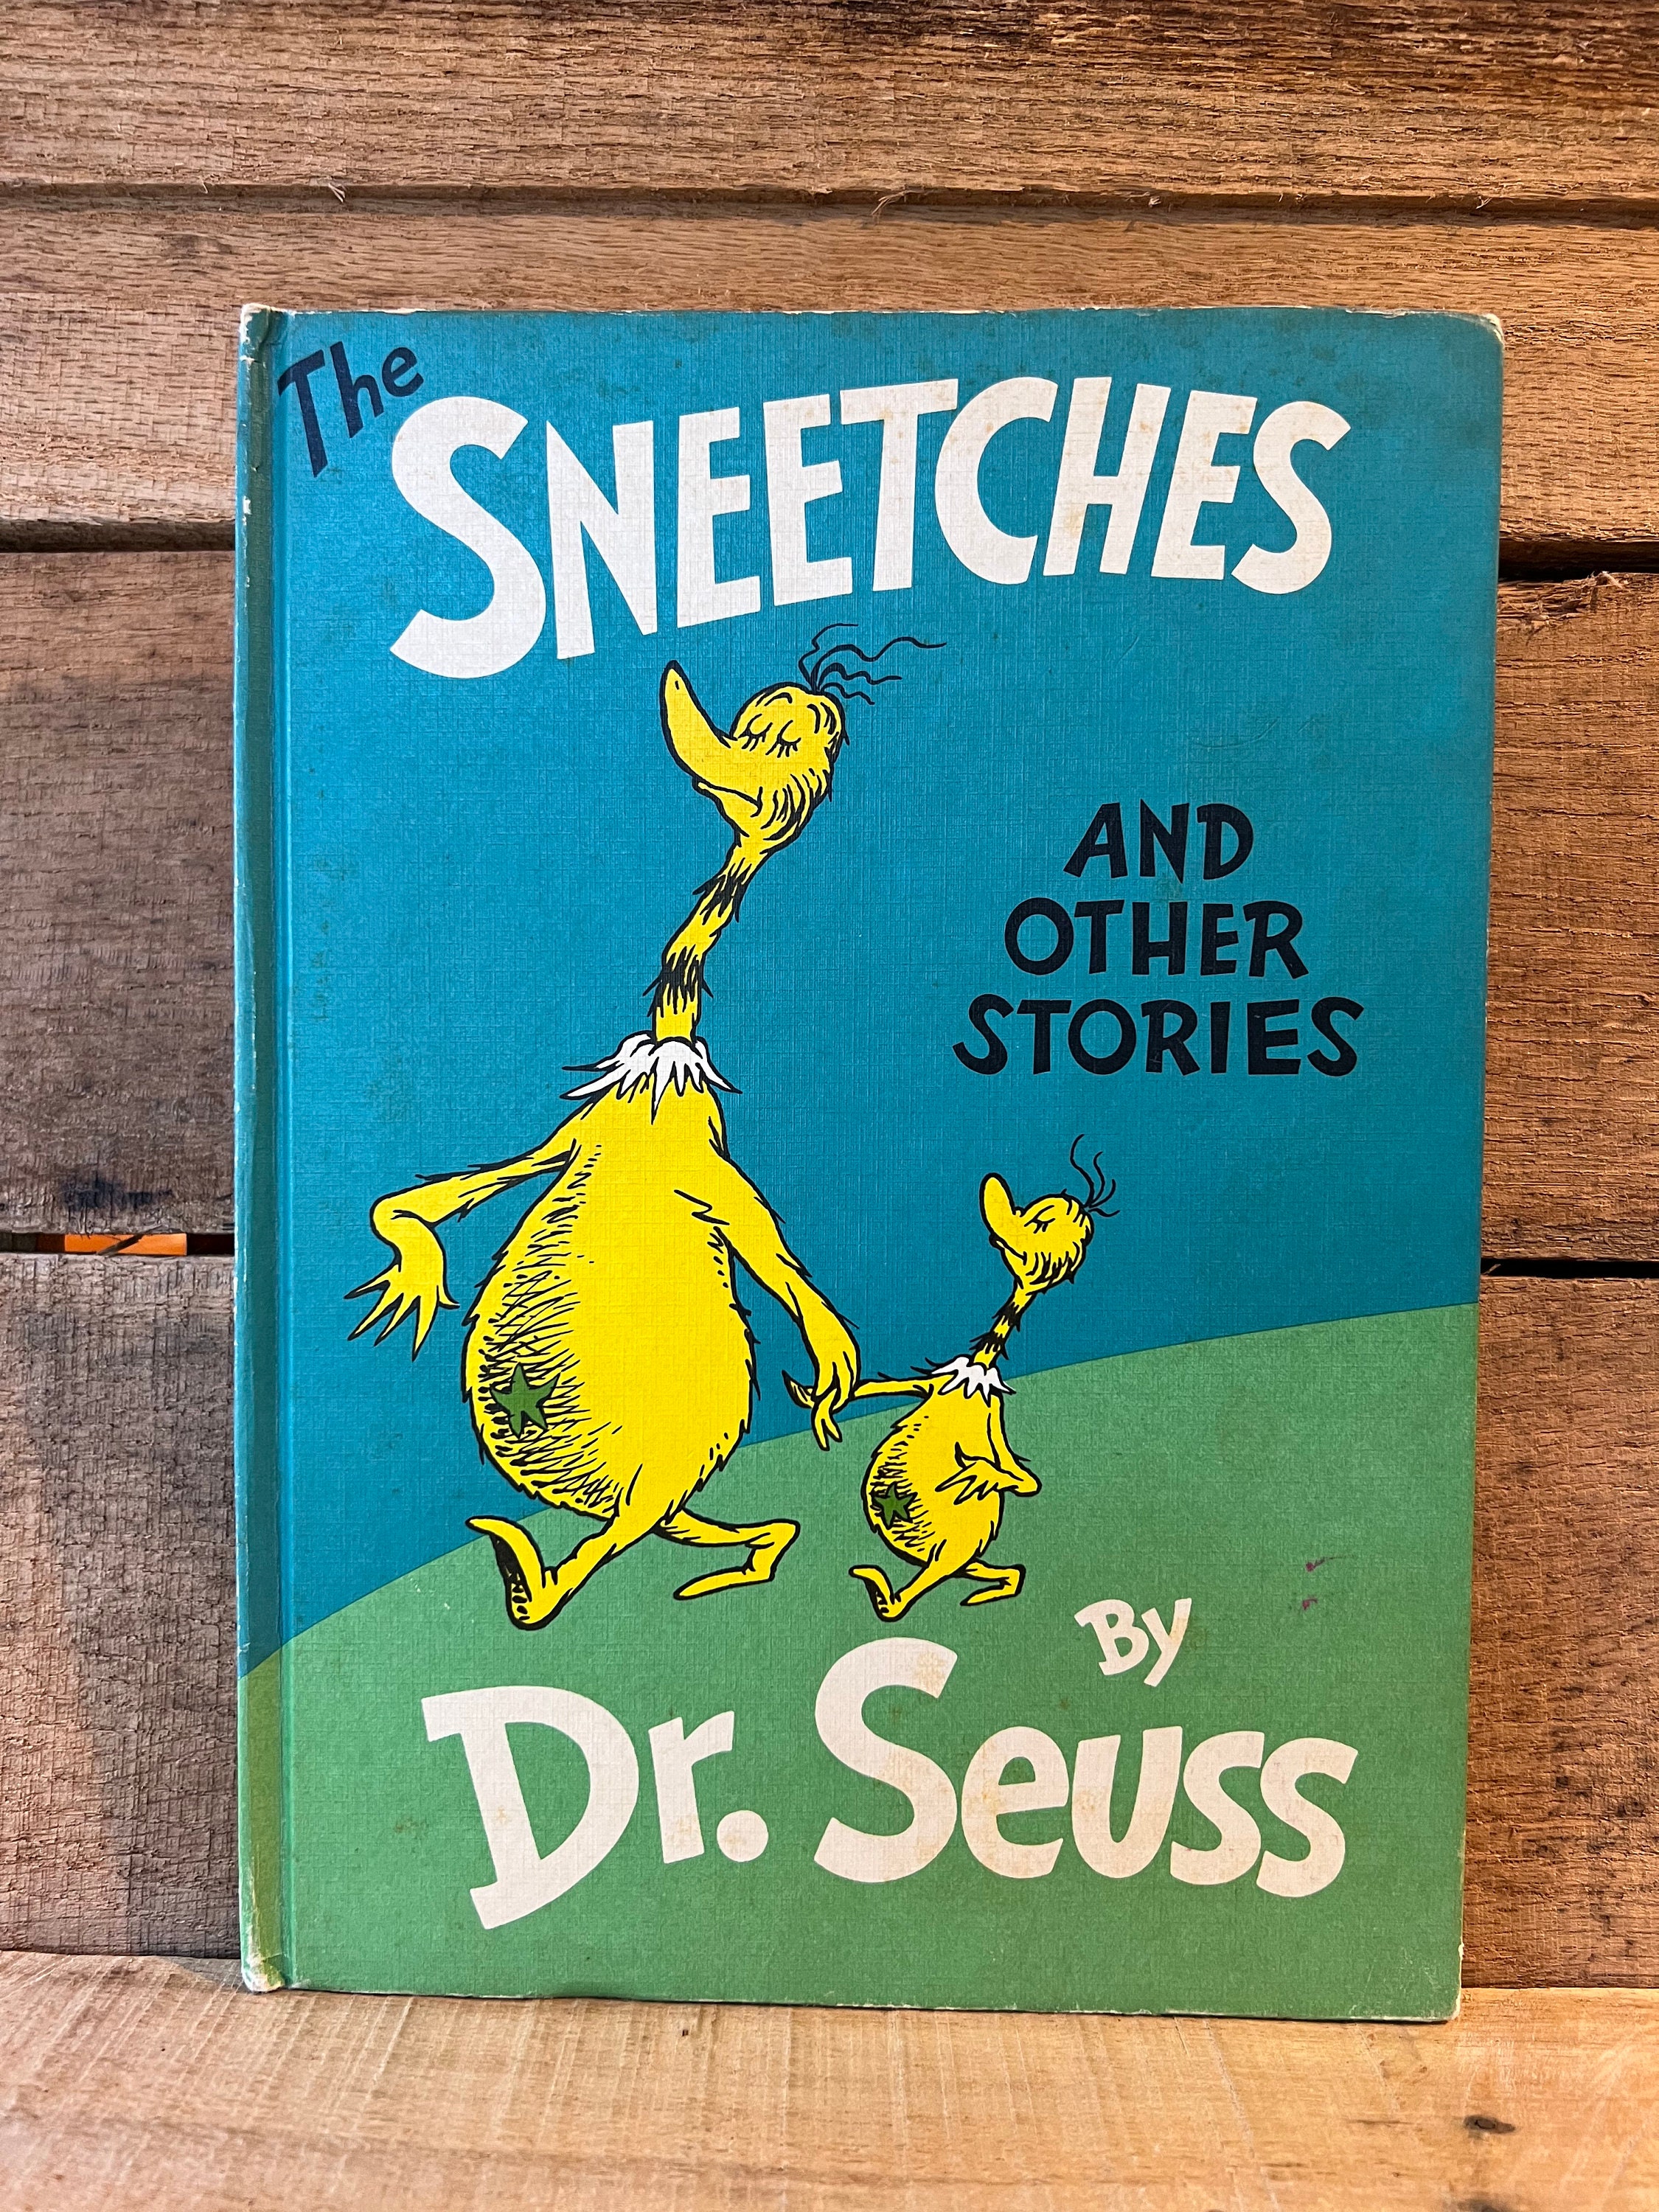 The Sneetches and Other Stories: Dr. Seuss 1961 - Etsy